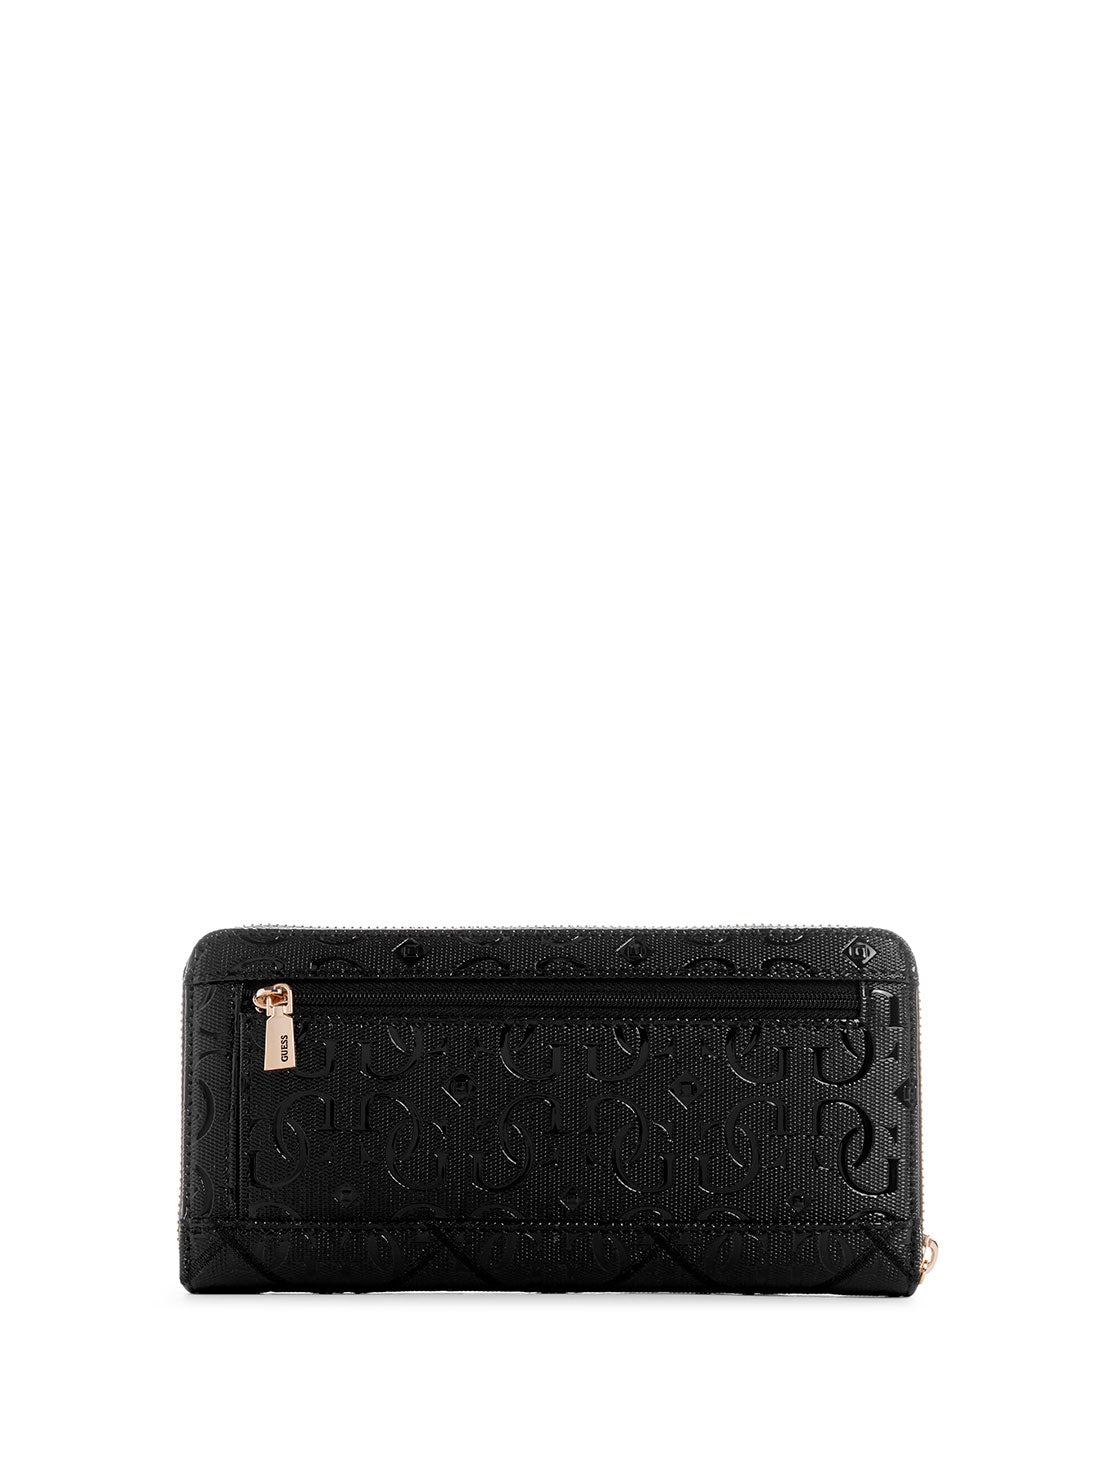 GUESS Women's Black Caddie Large Wallet GG878346 Back View